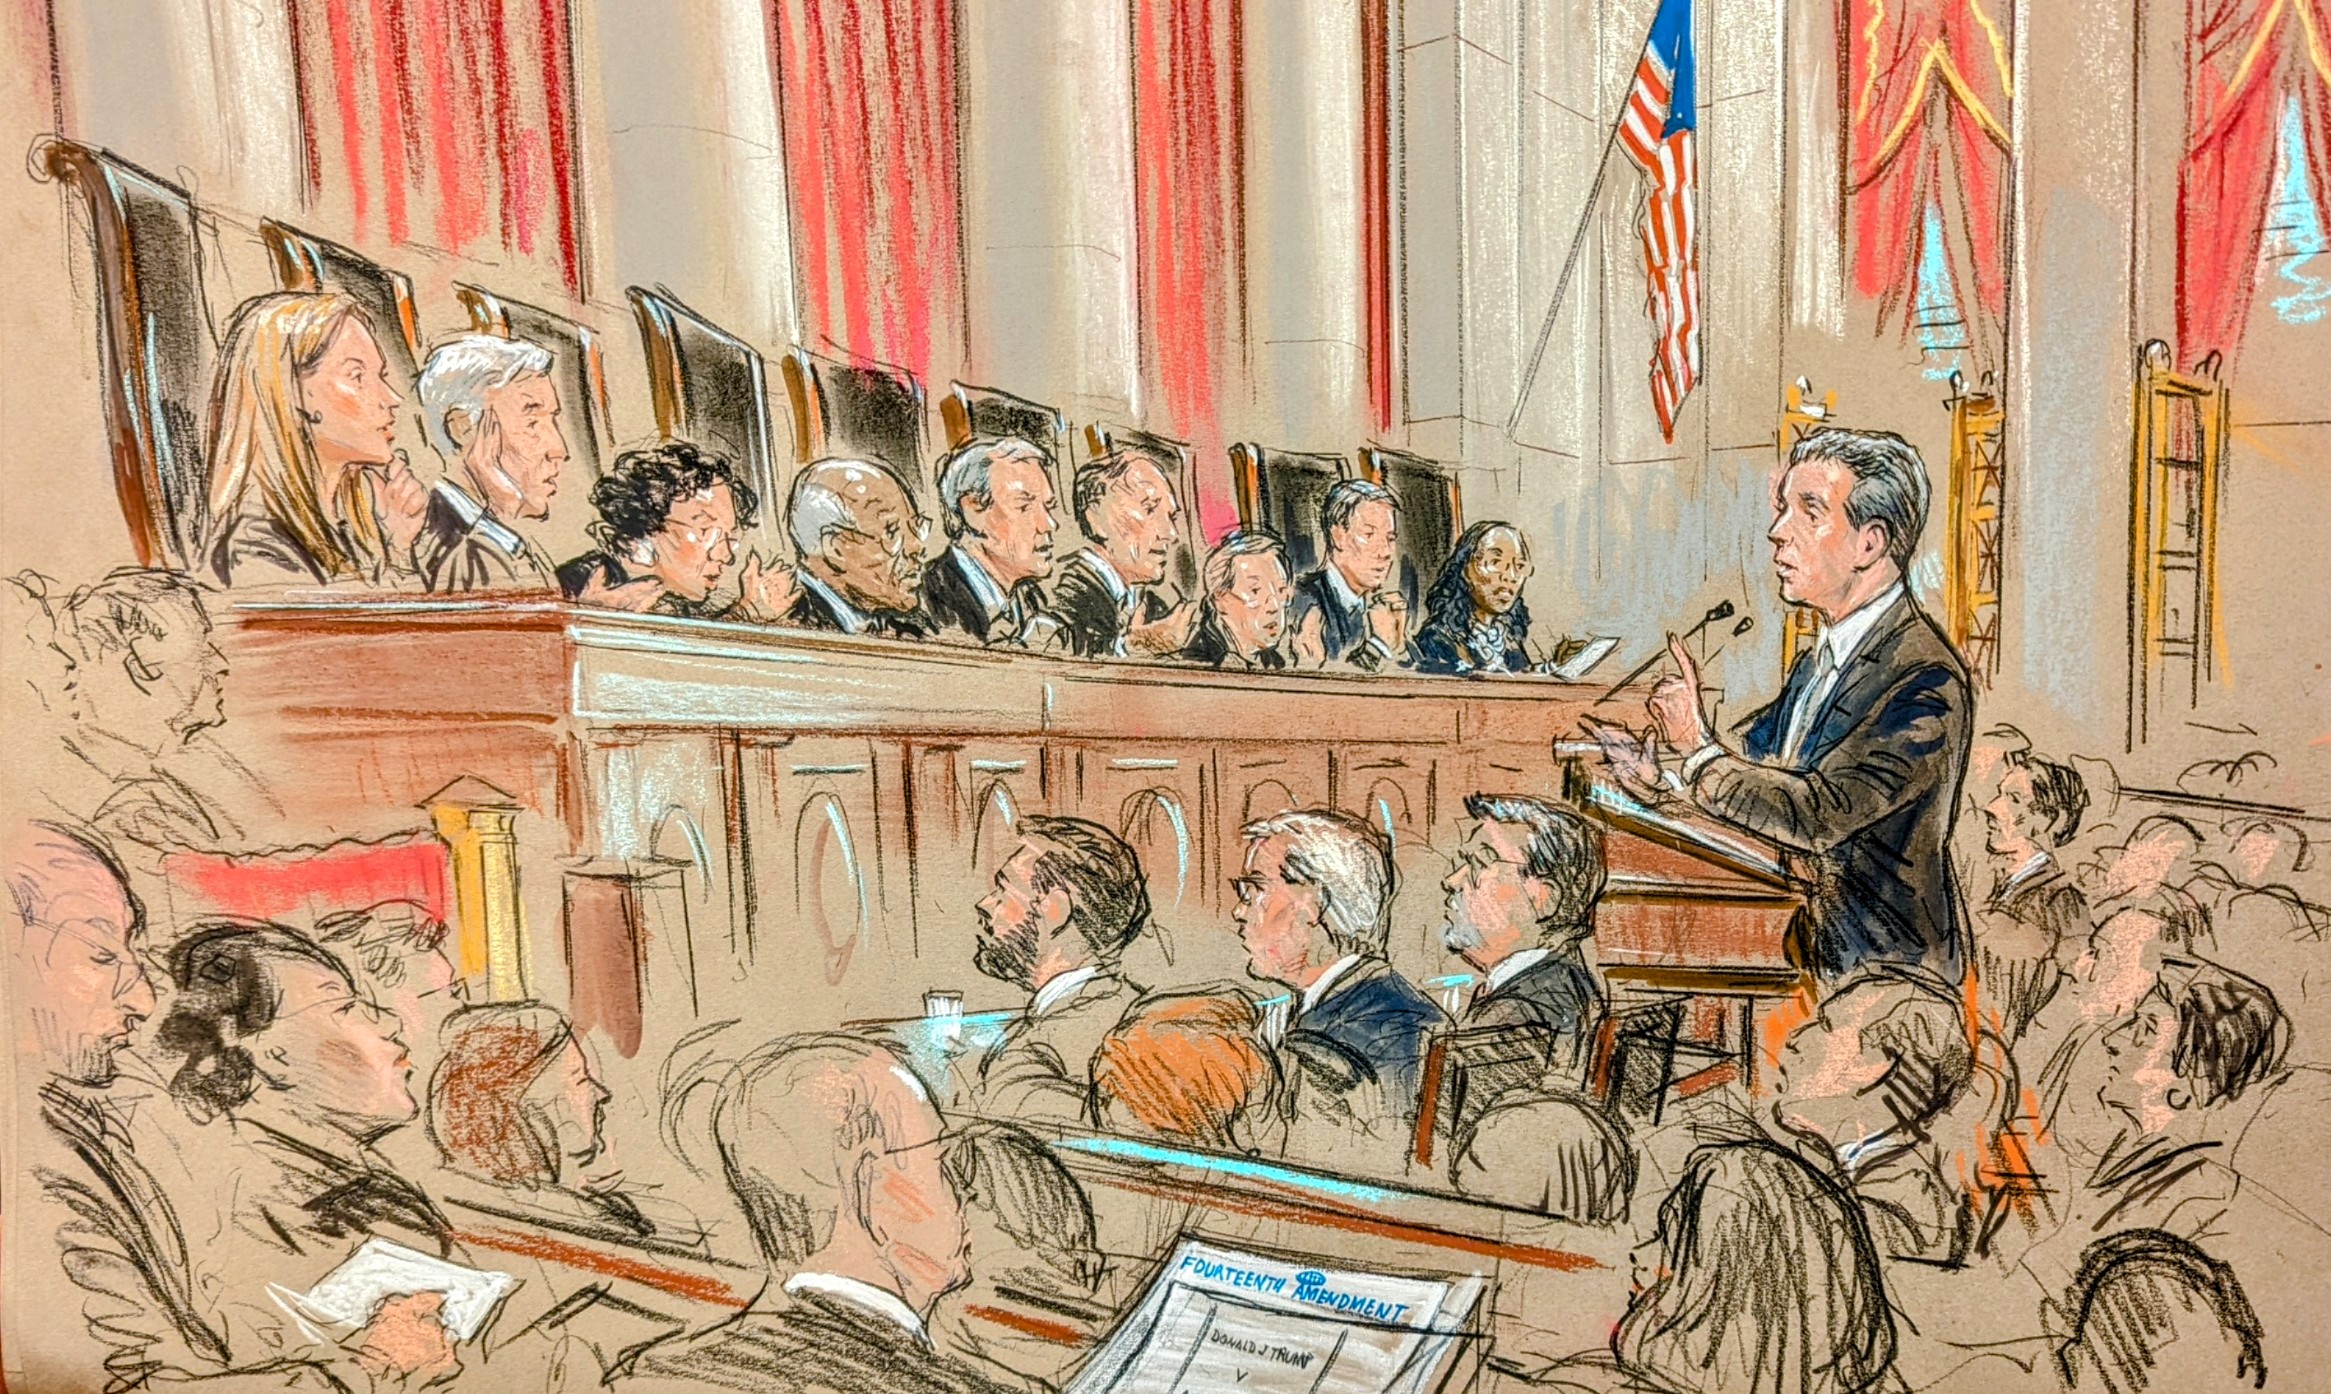 In a full courtroom, the audience looks on as a lawyer stands and discusses his case with all nine justices on the bench.